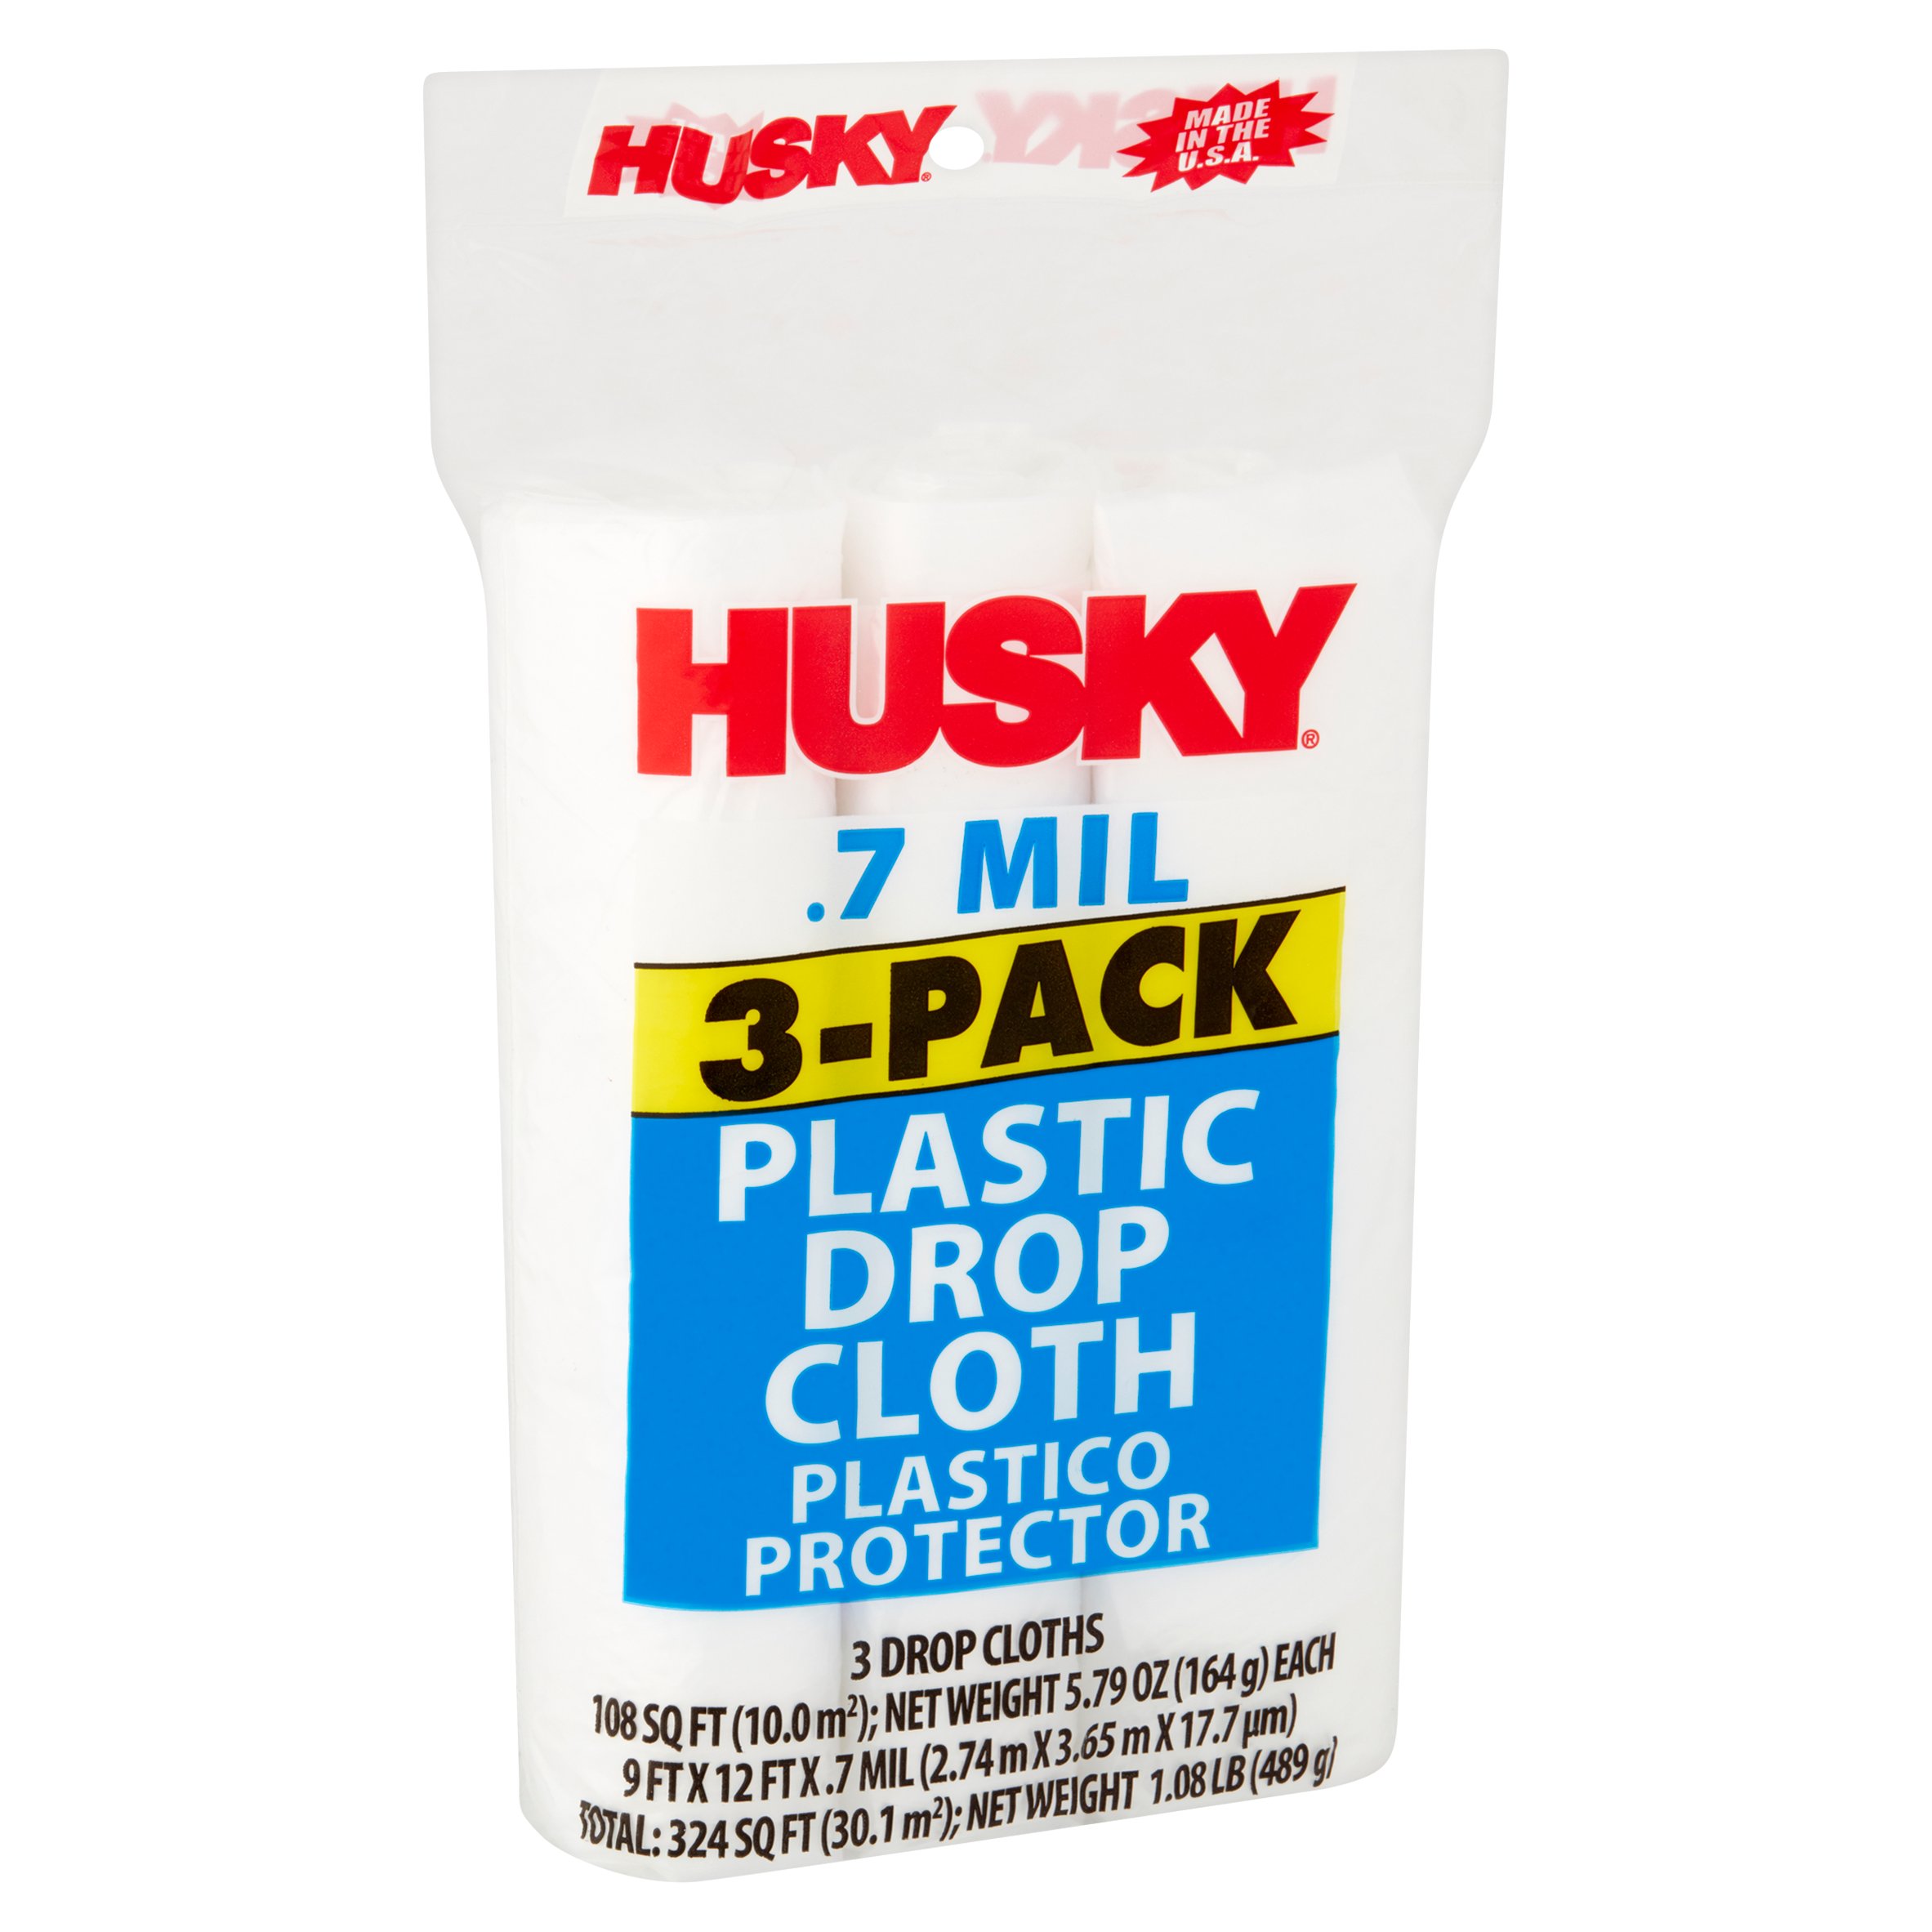 Husky Clear Plastic Drop Cloth, 0.7 Mil, 9 Ft x 12 Ft, 3 Pack - image 2 of 9